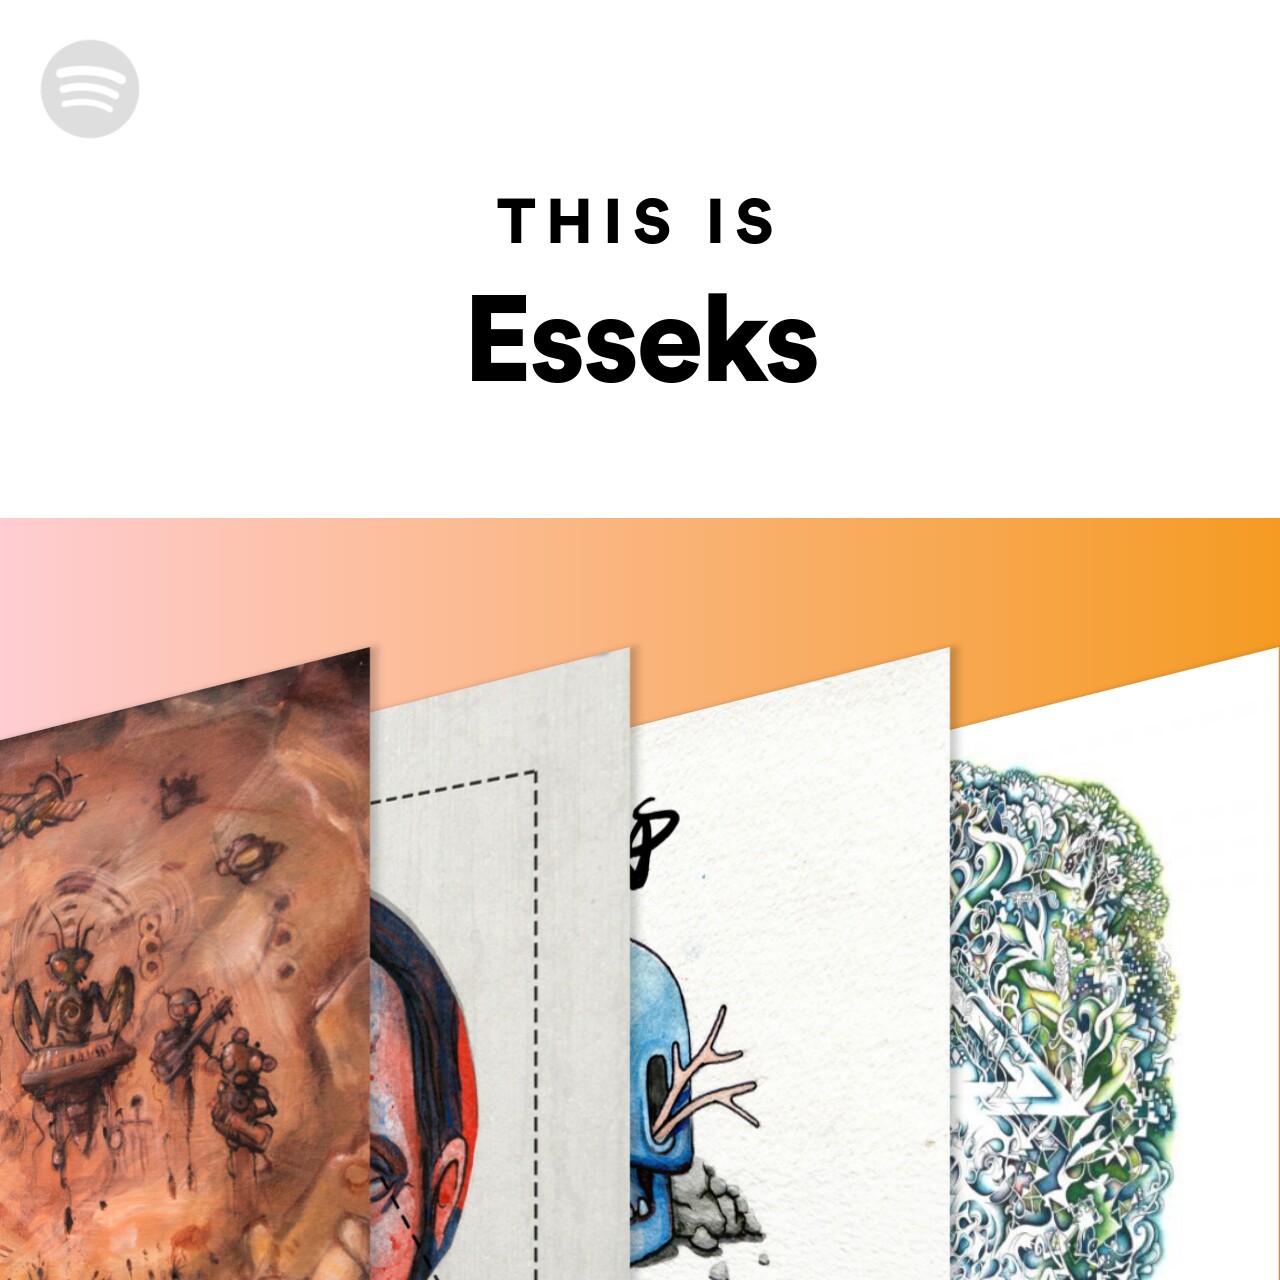 This Is Esseks